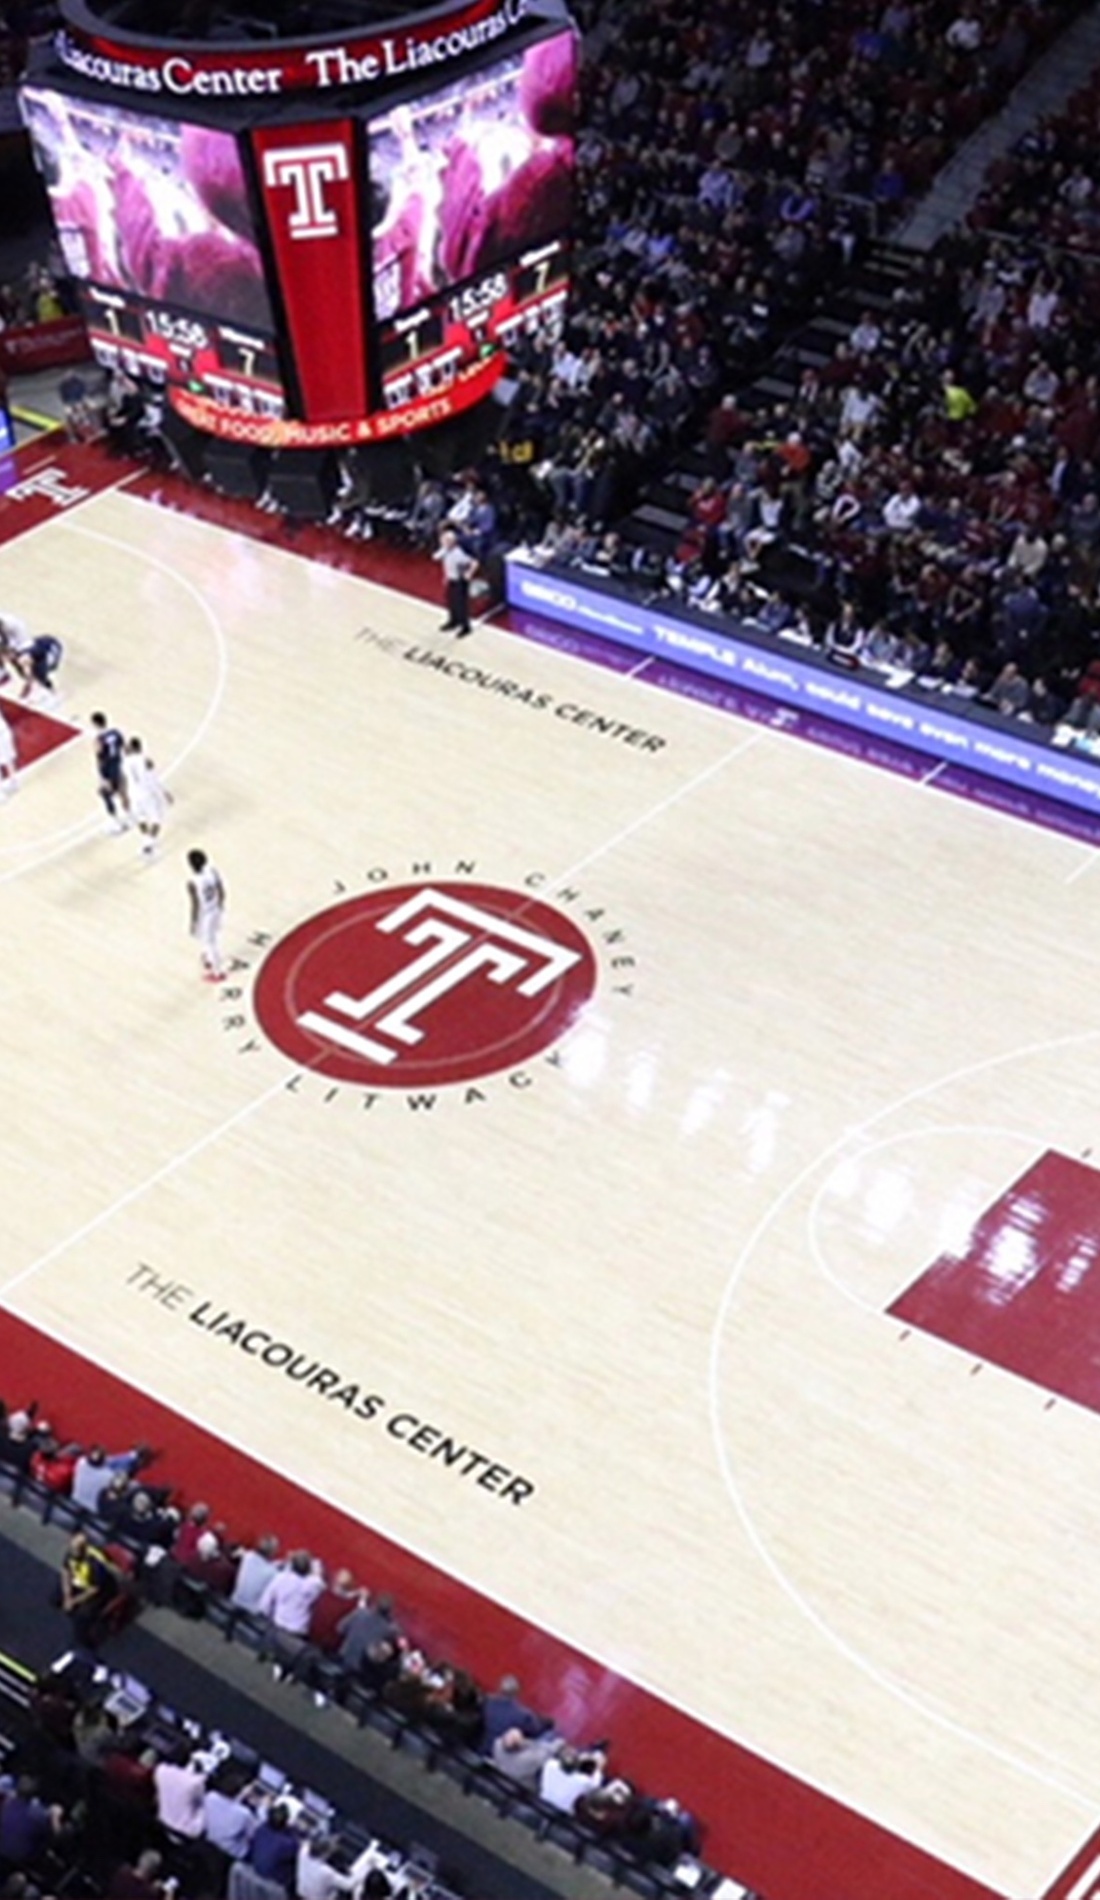 A Temple Owls Basketball live event